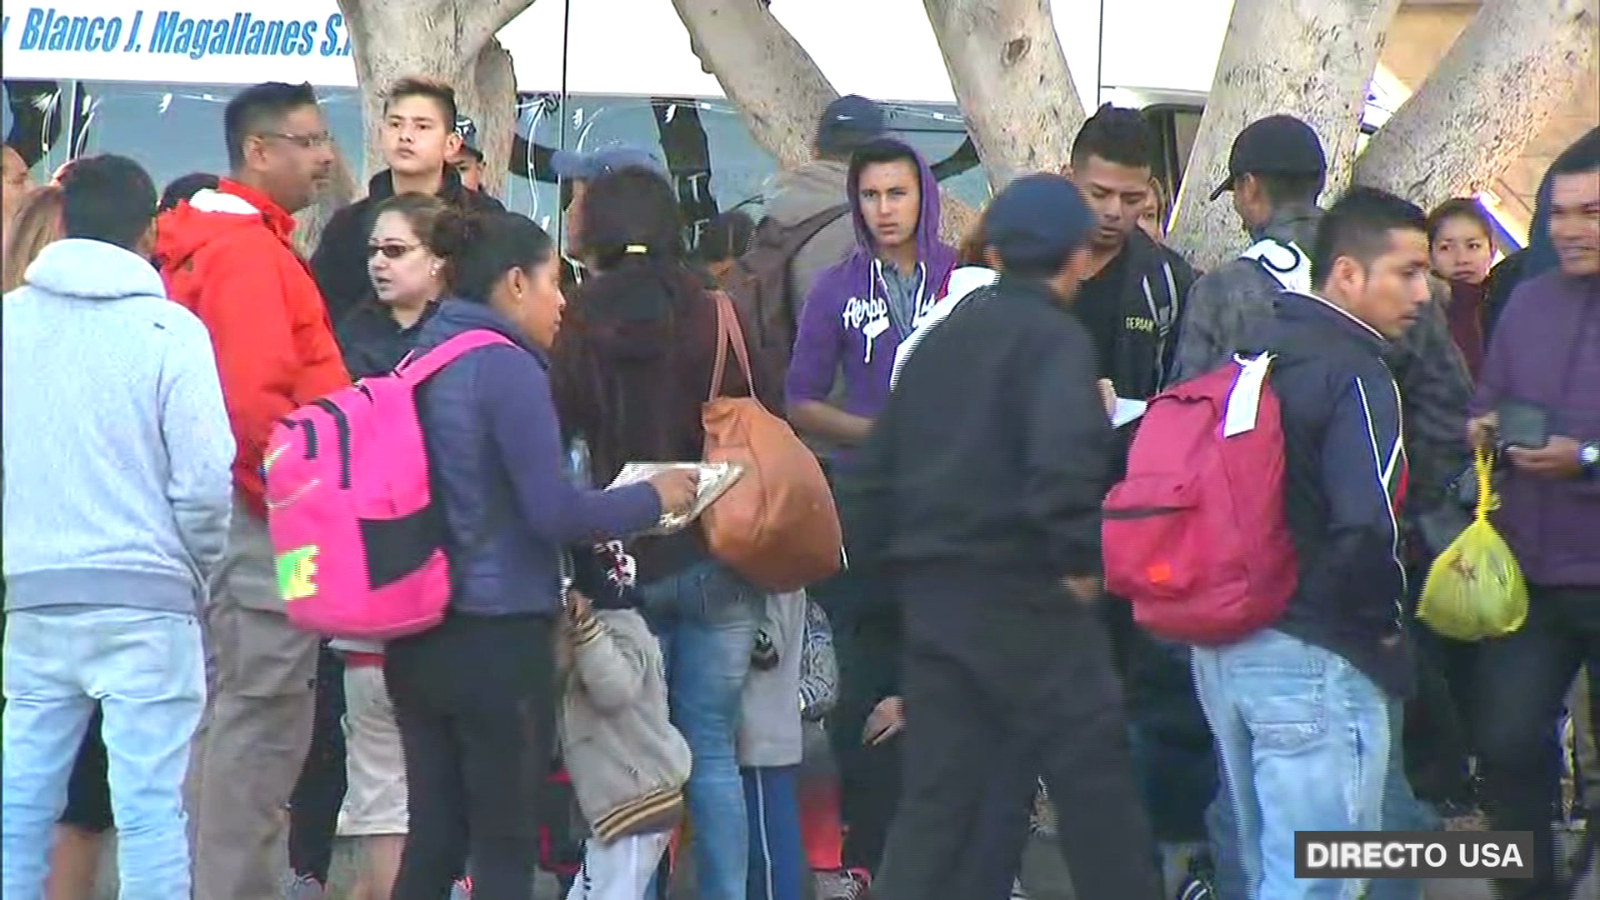 Do you know what new process the Biden administration wants to implement for asylum seekers in the US?  |  Video